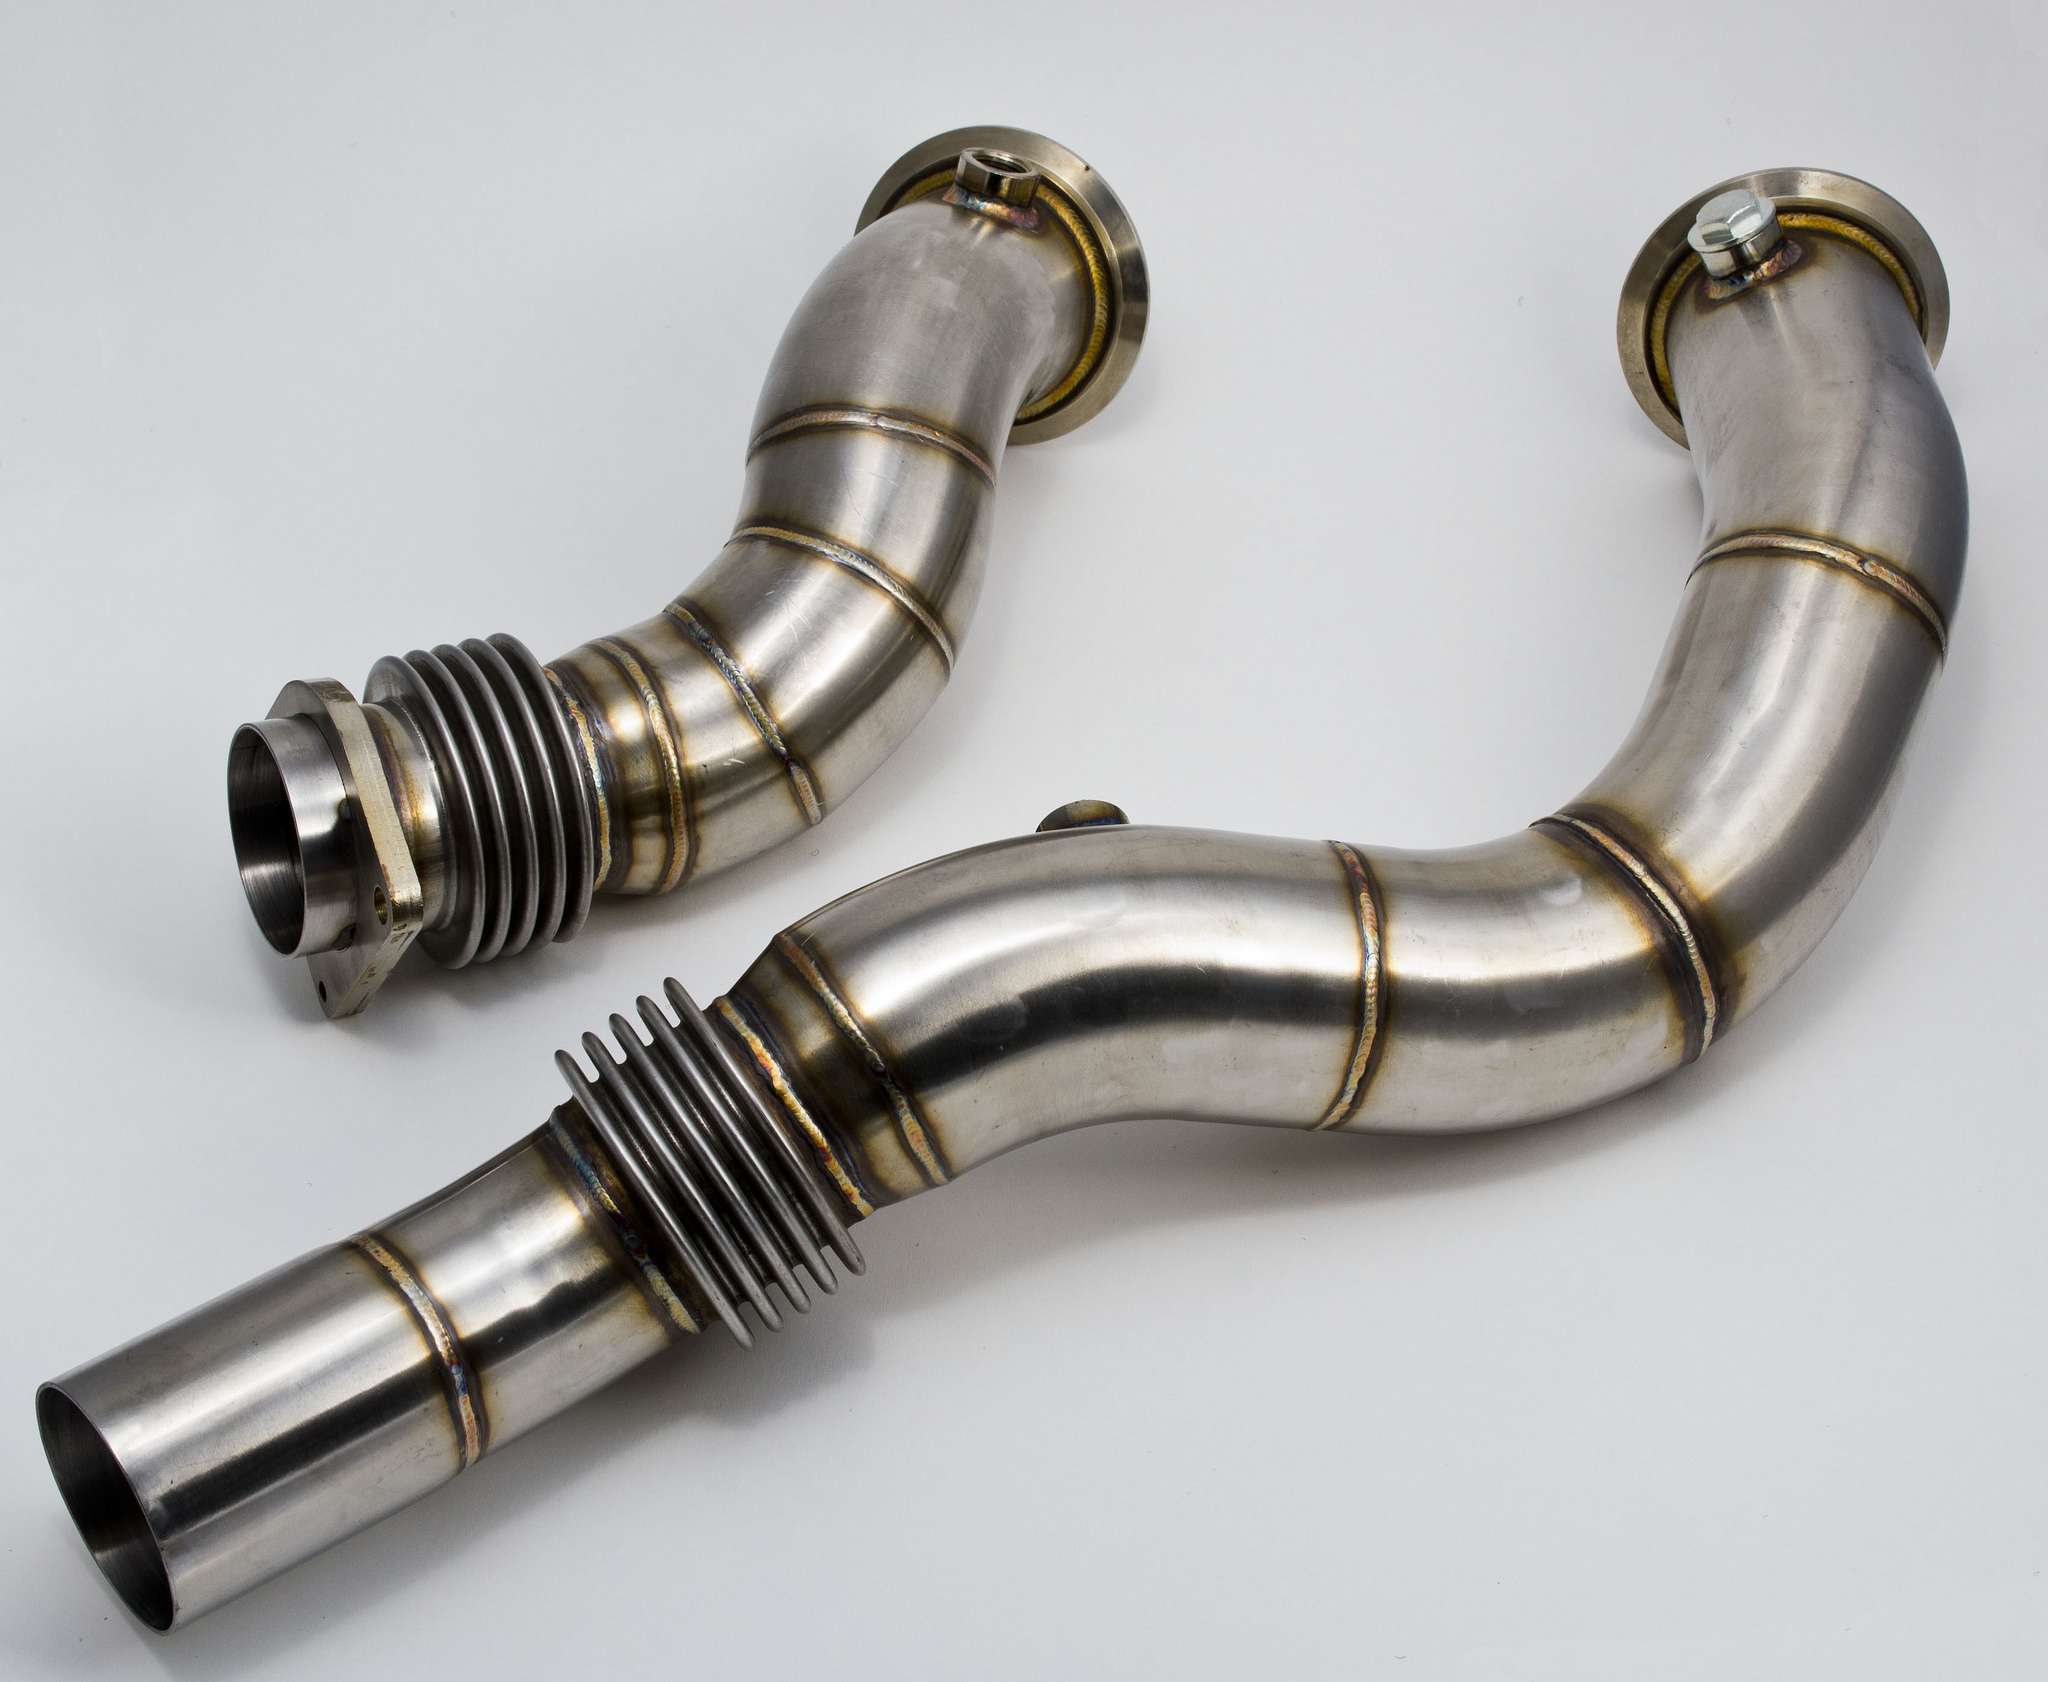 Active Autowerke (AA) BMW S55 M3 / M4 catless downpipes. Free shipping these stainless steel AA S55 DP, fits F80/F82